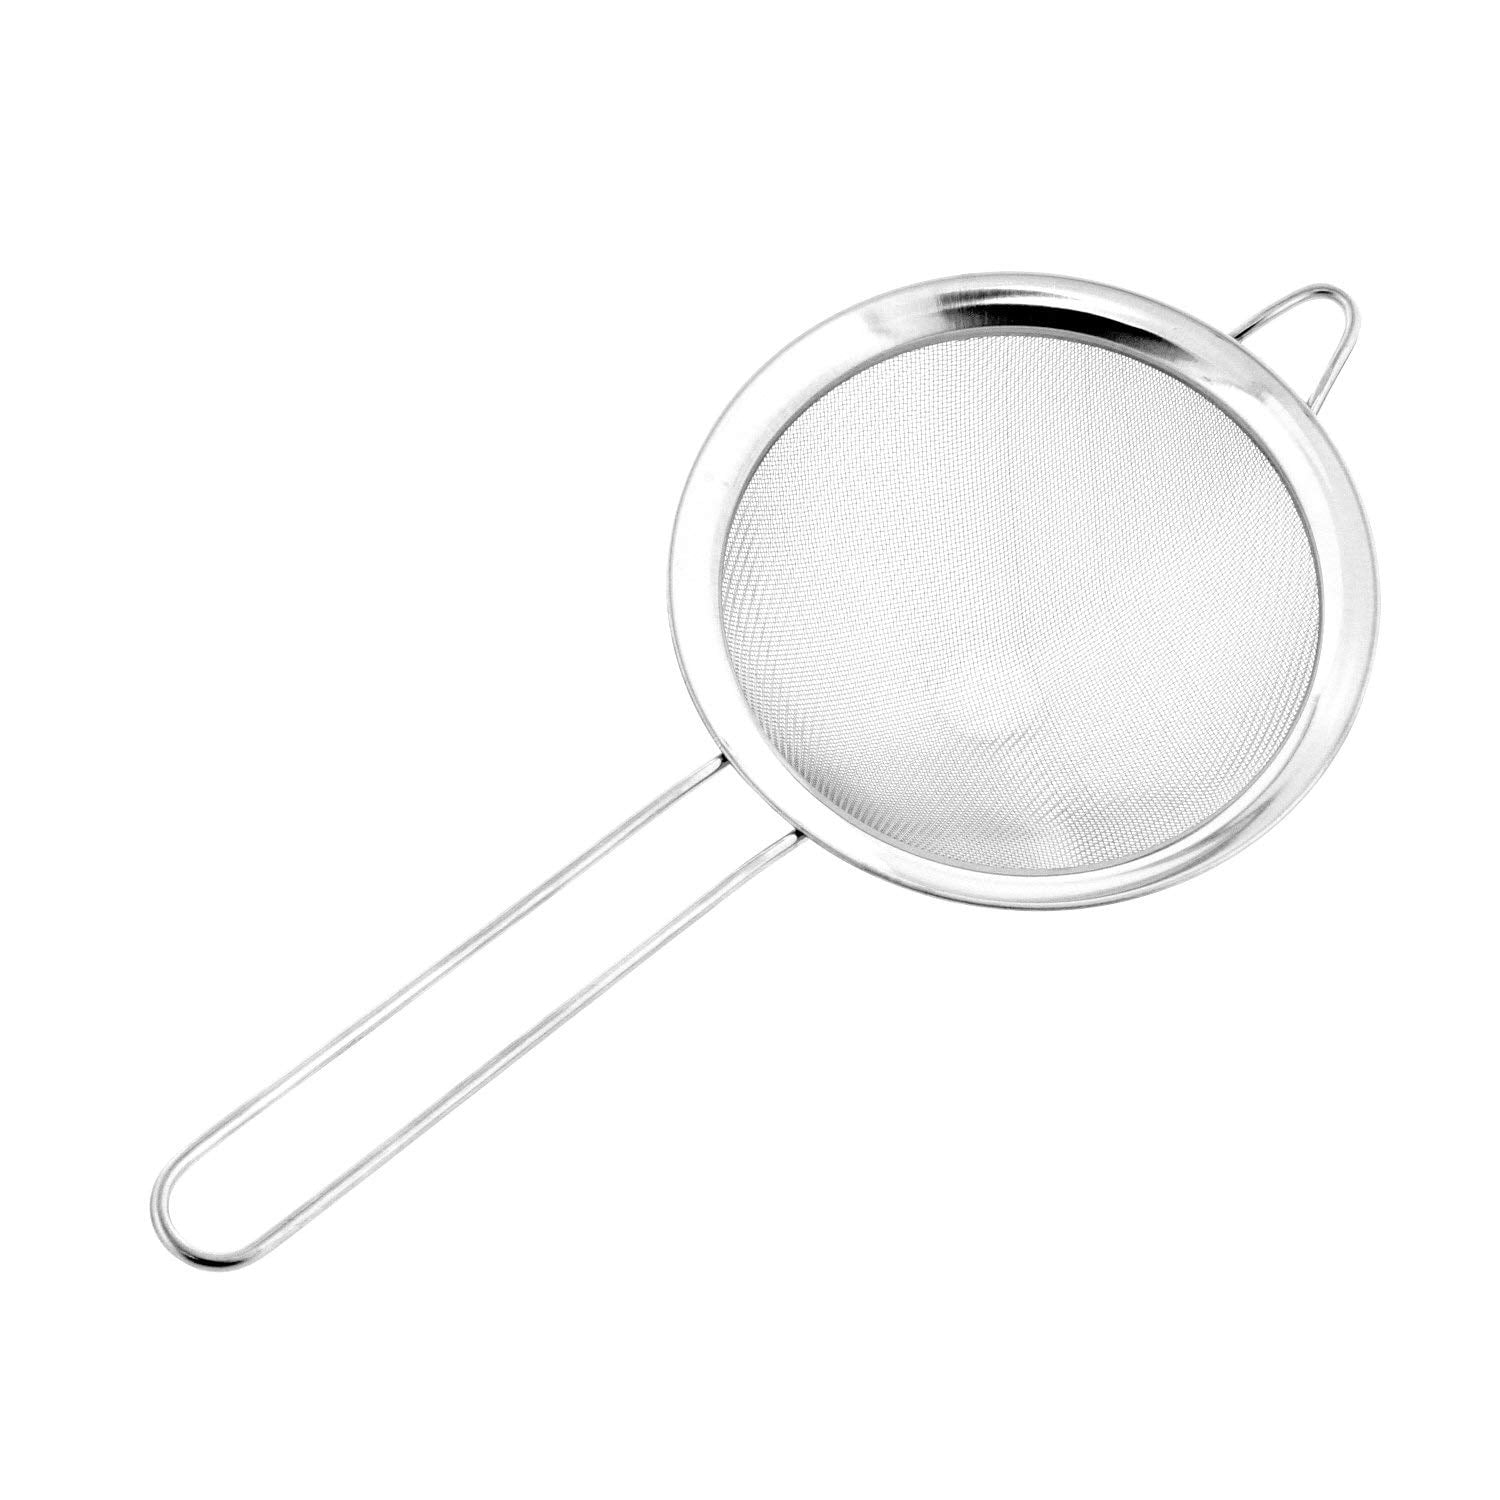 Extra Fine Twill Mesh Stainless Steel Conical Strainers Home Kitchen  Strainer Filter Leach Filtrator